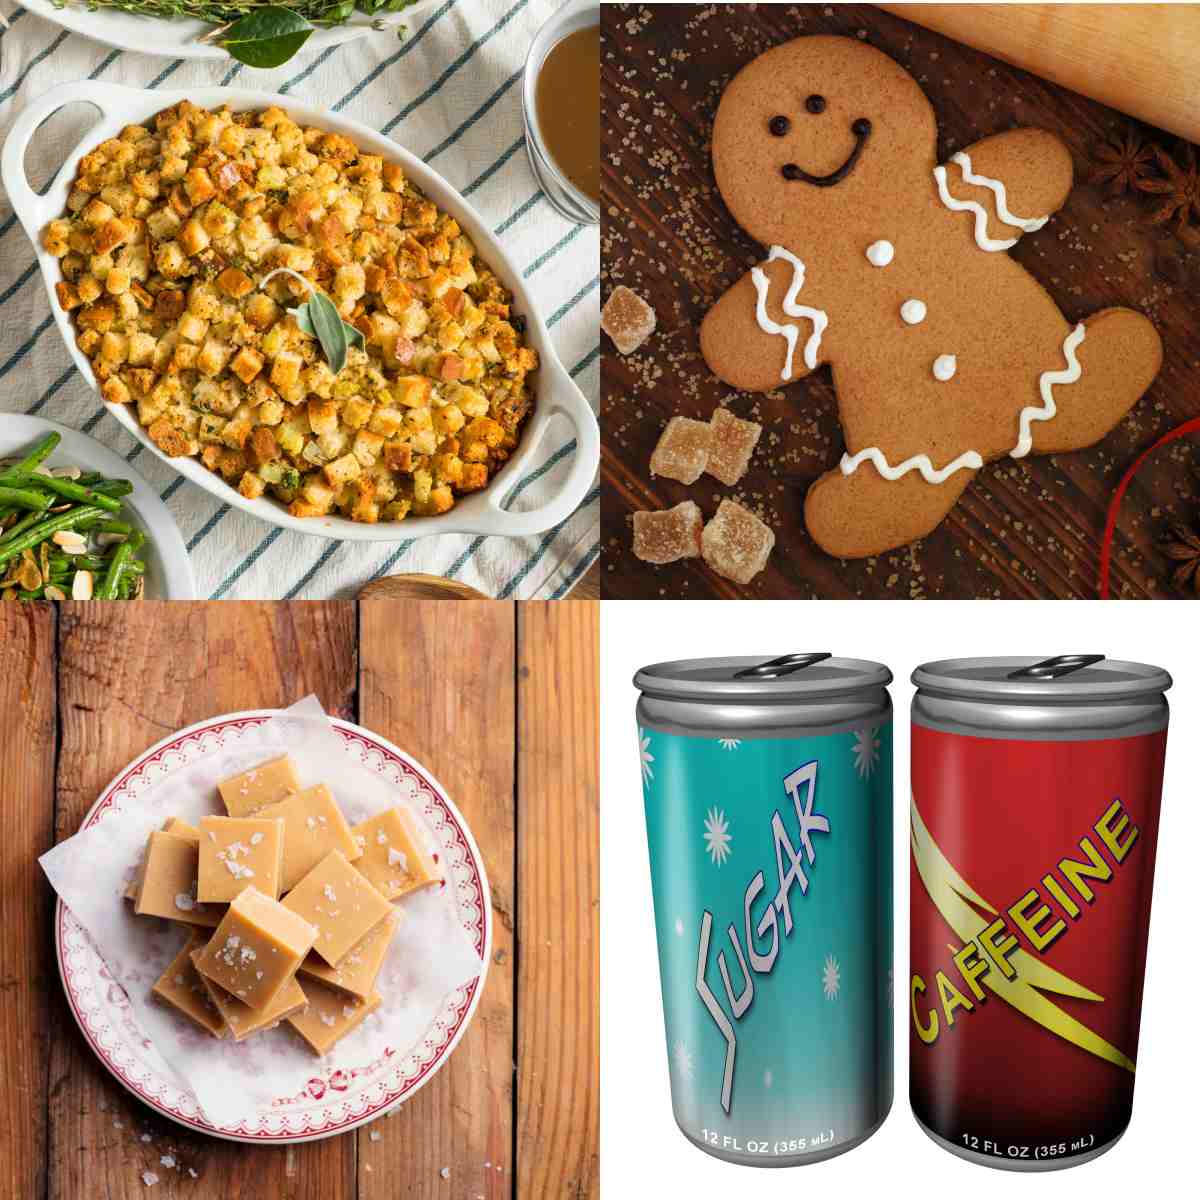 A square of food holidays in November the top left representing National Stuffing Day, the top right representing National Gingerbread Cookie Day, the bottom left representing National Peanut Butter Fudge Day, and the bottom right representing National Carbonated Beverage with Caffeine Day.